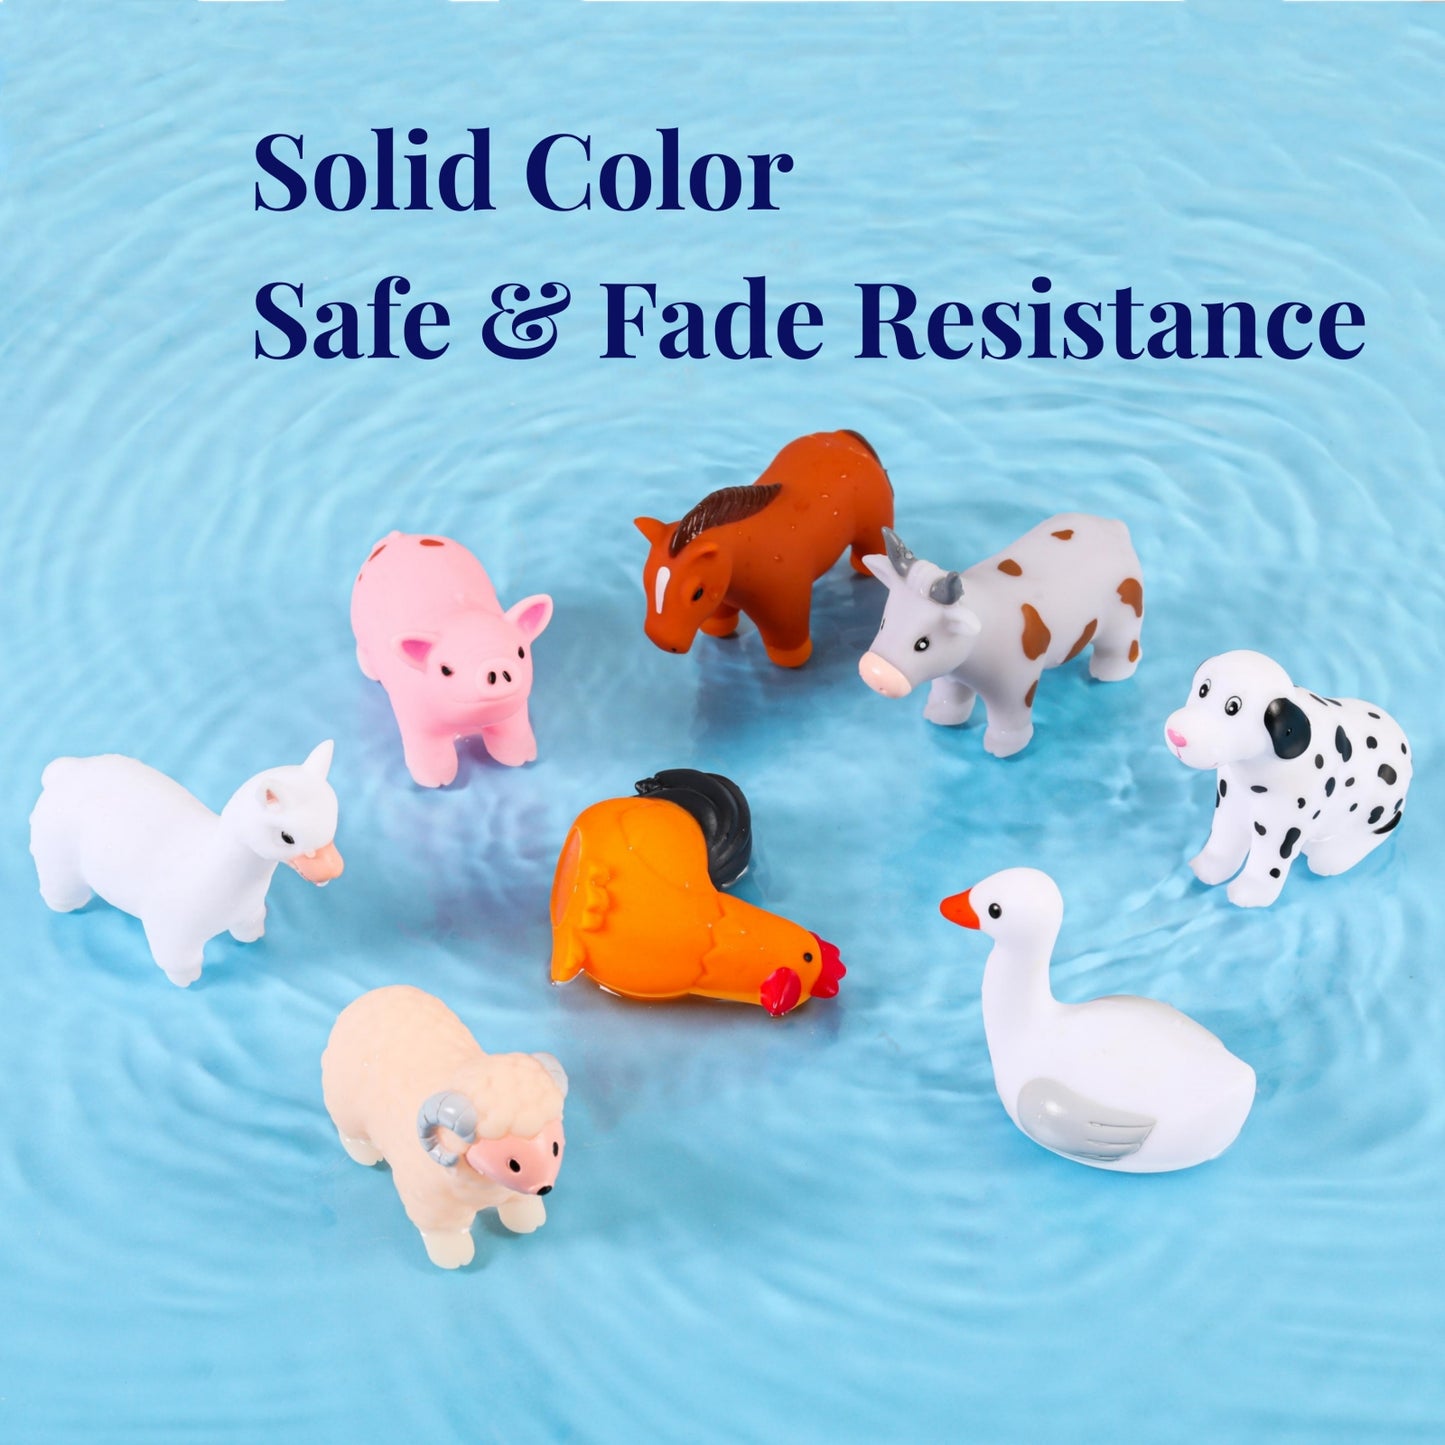 Bath Toys Mold Free No Hole for Toddlers/ Infants/ Babies, No Mold Bathtub Toys (Animal Ⅱ, 8 Pcs with Storage Bag)